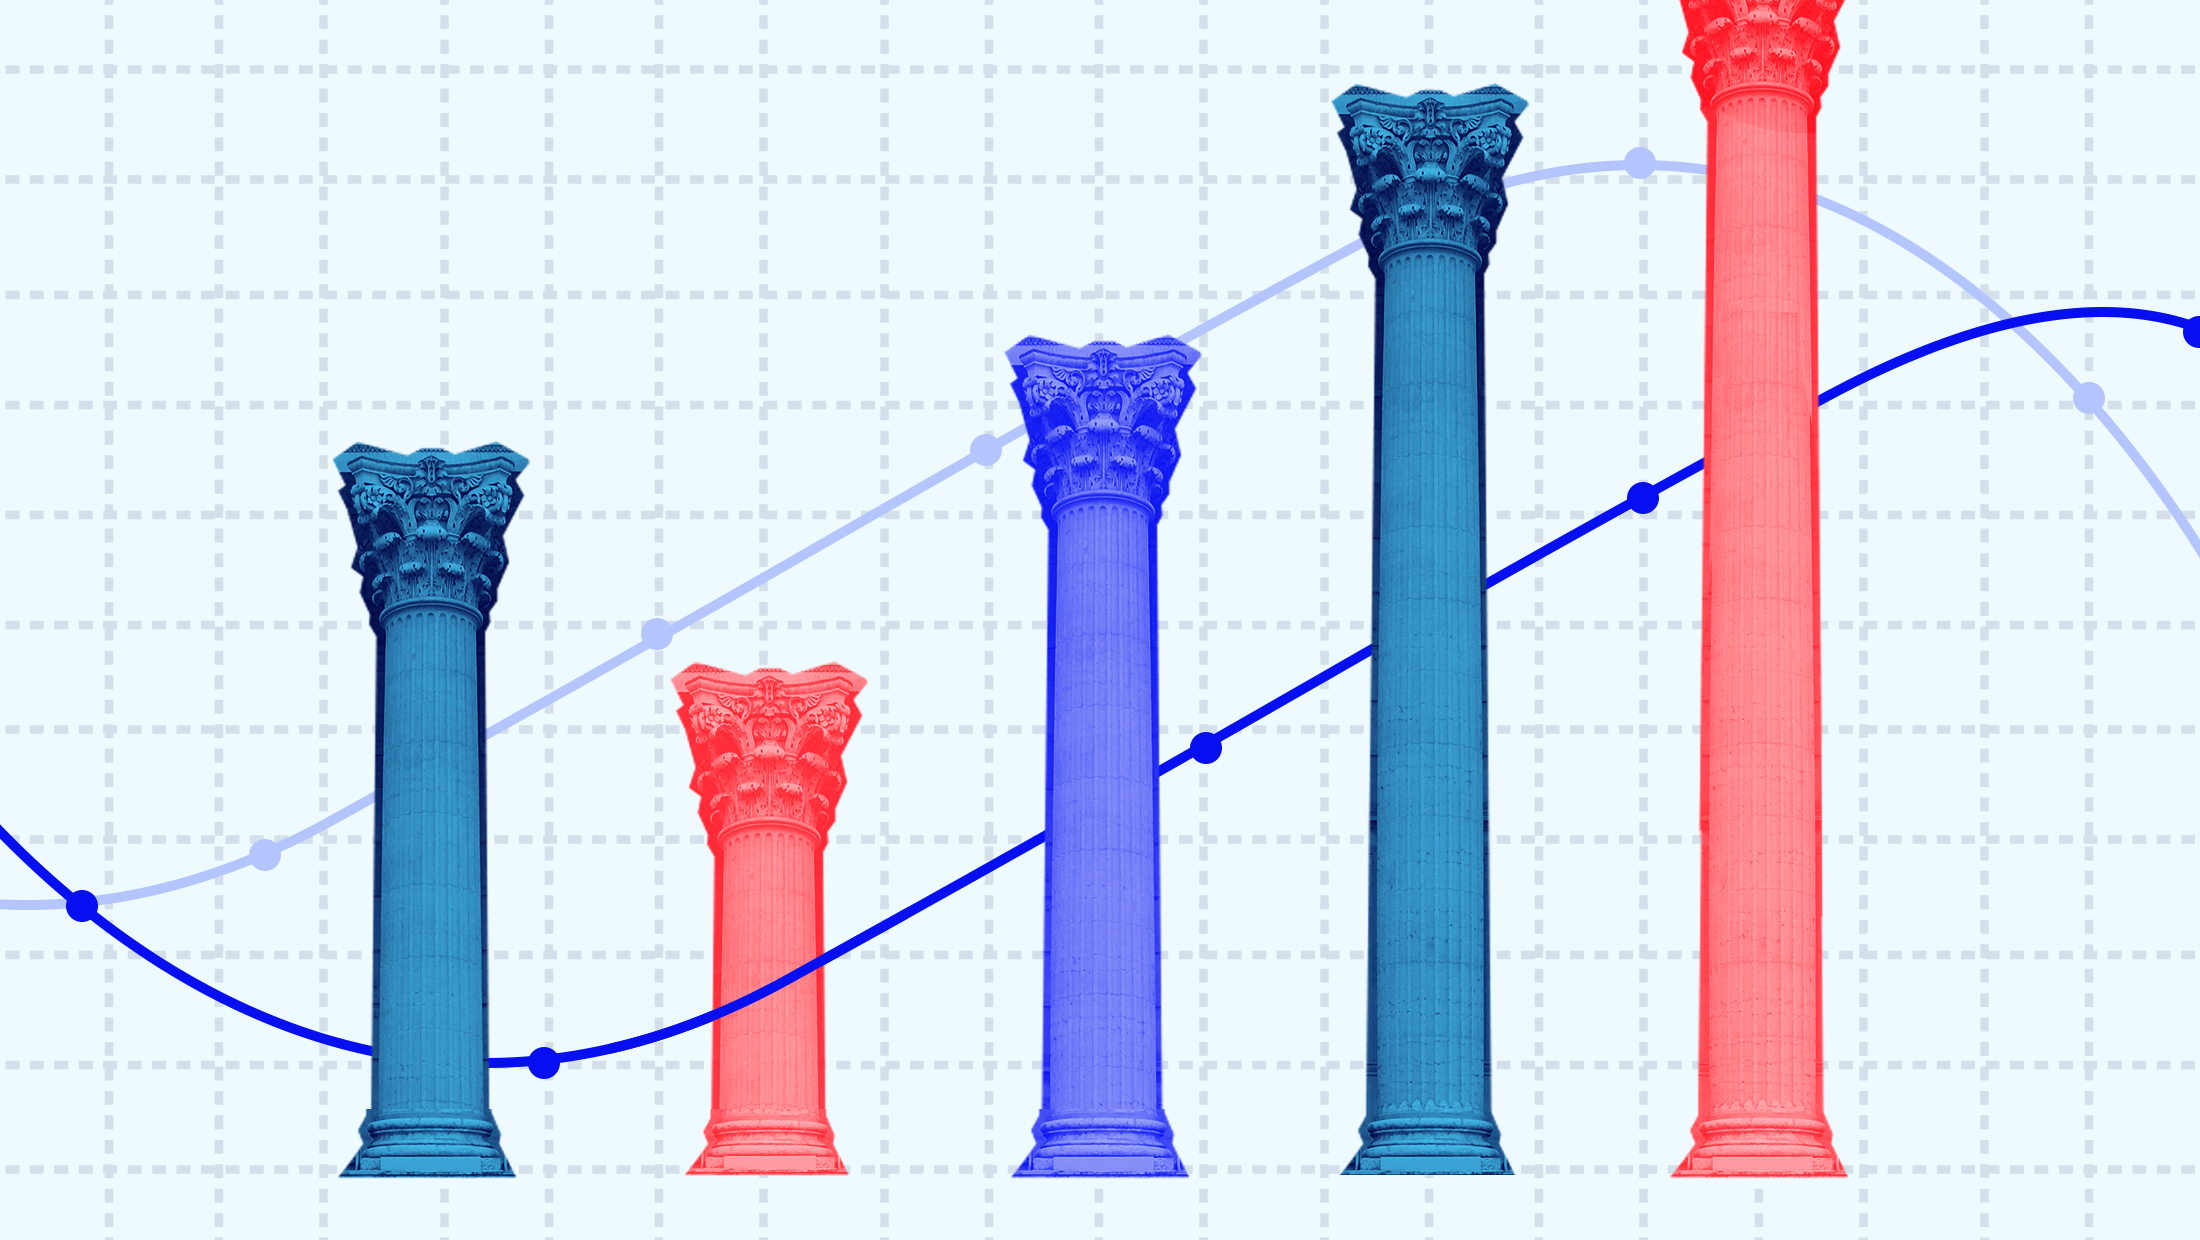 Red and blue toned building columns of differing heights mounted on a piece of graph paper with two blue trend lines.